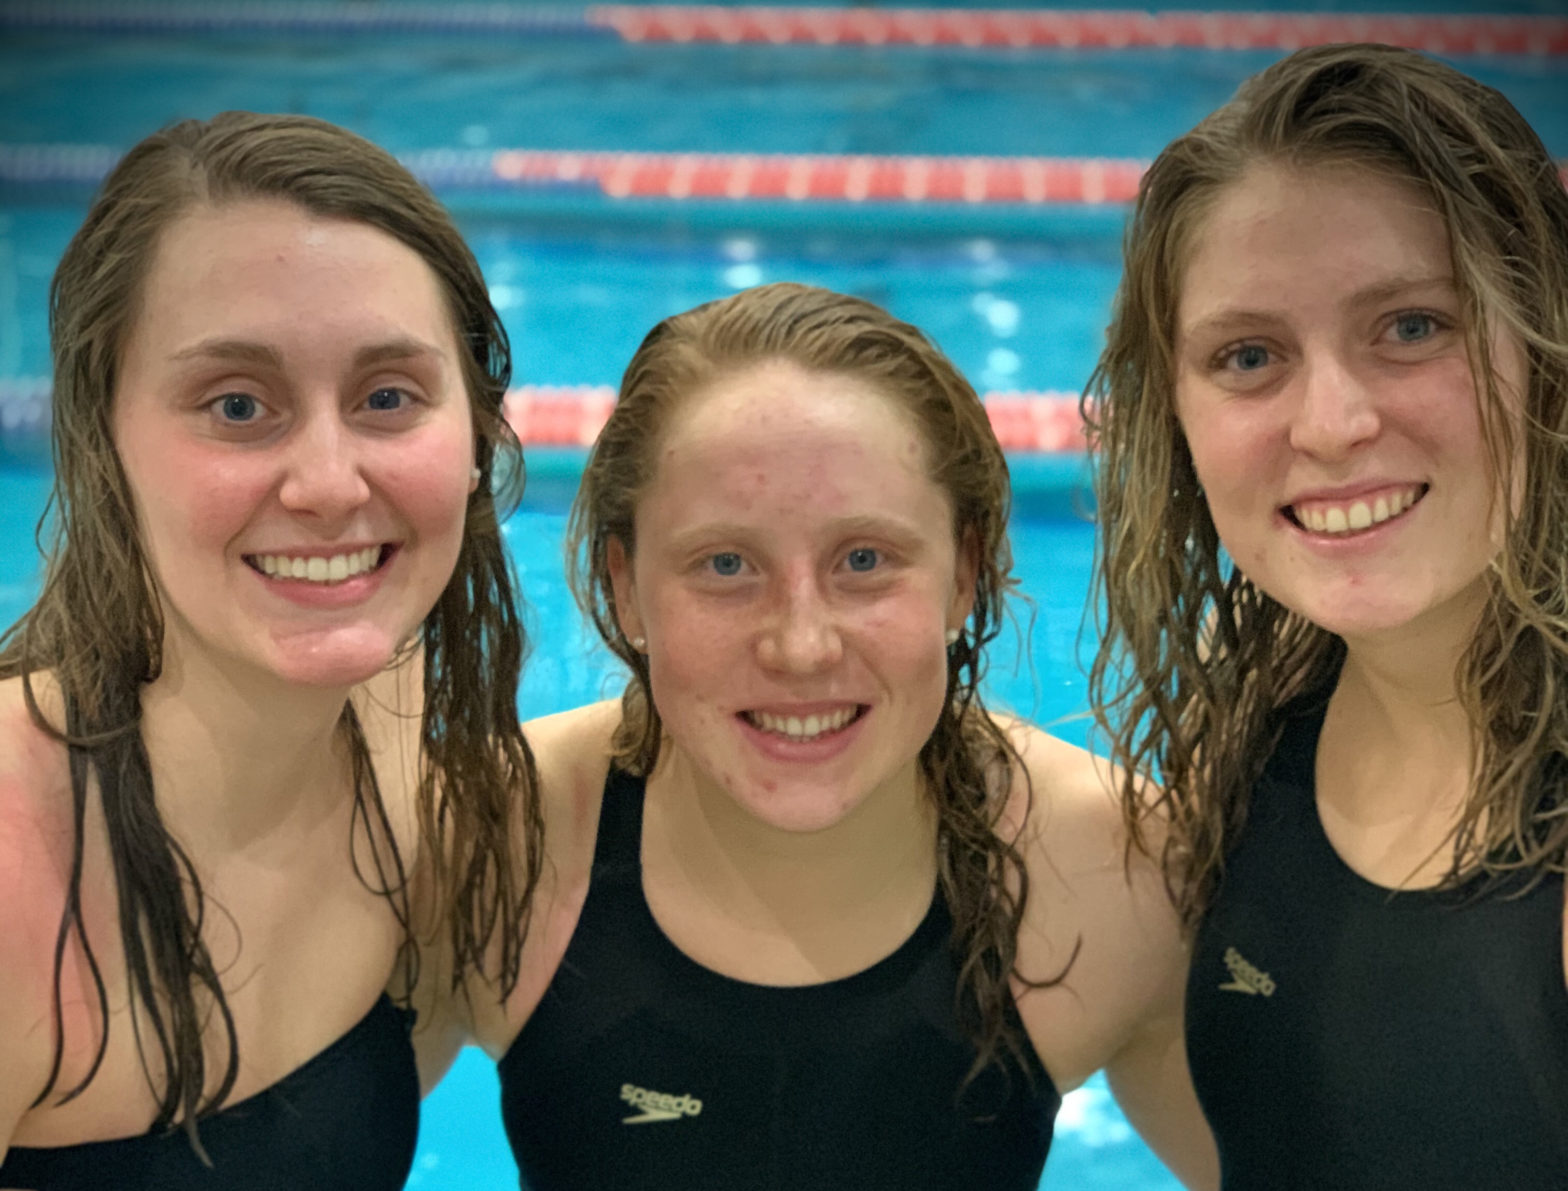 Hope Reynolds, right, poses for a poolside photo with Emma Schaefer, center, and Mackenzie Ralston.